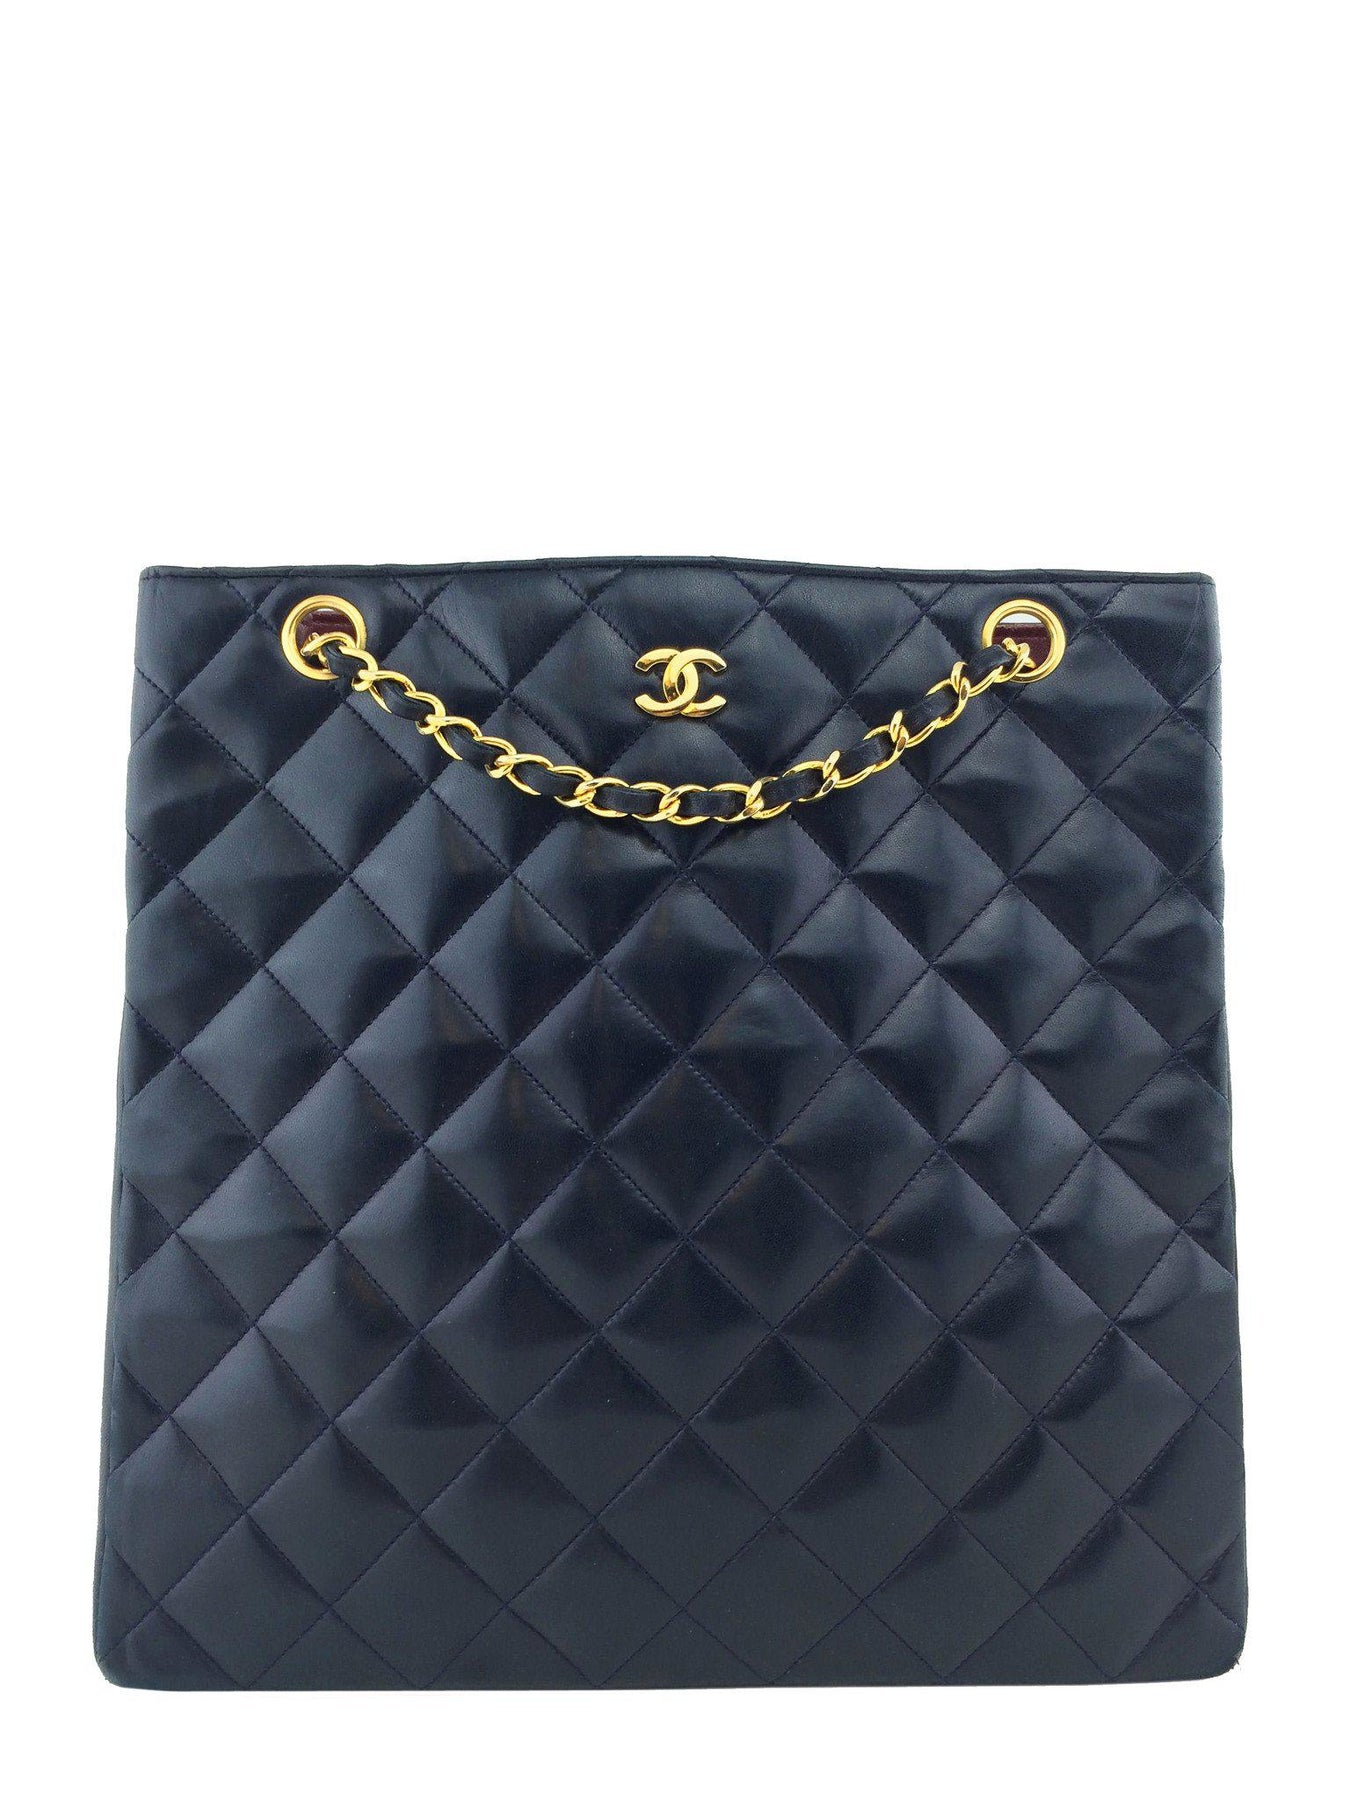 Chanel Vintage Quilted Shopper Lambskin Leather Bag